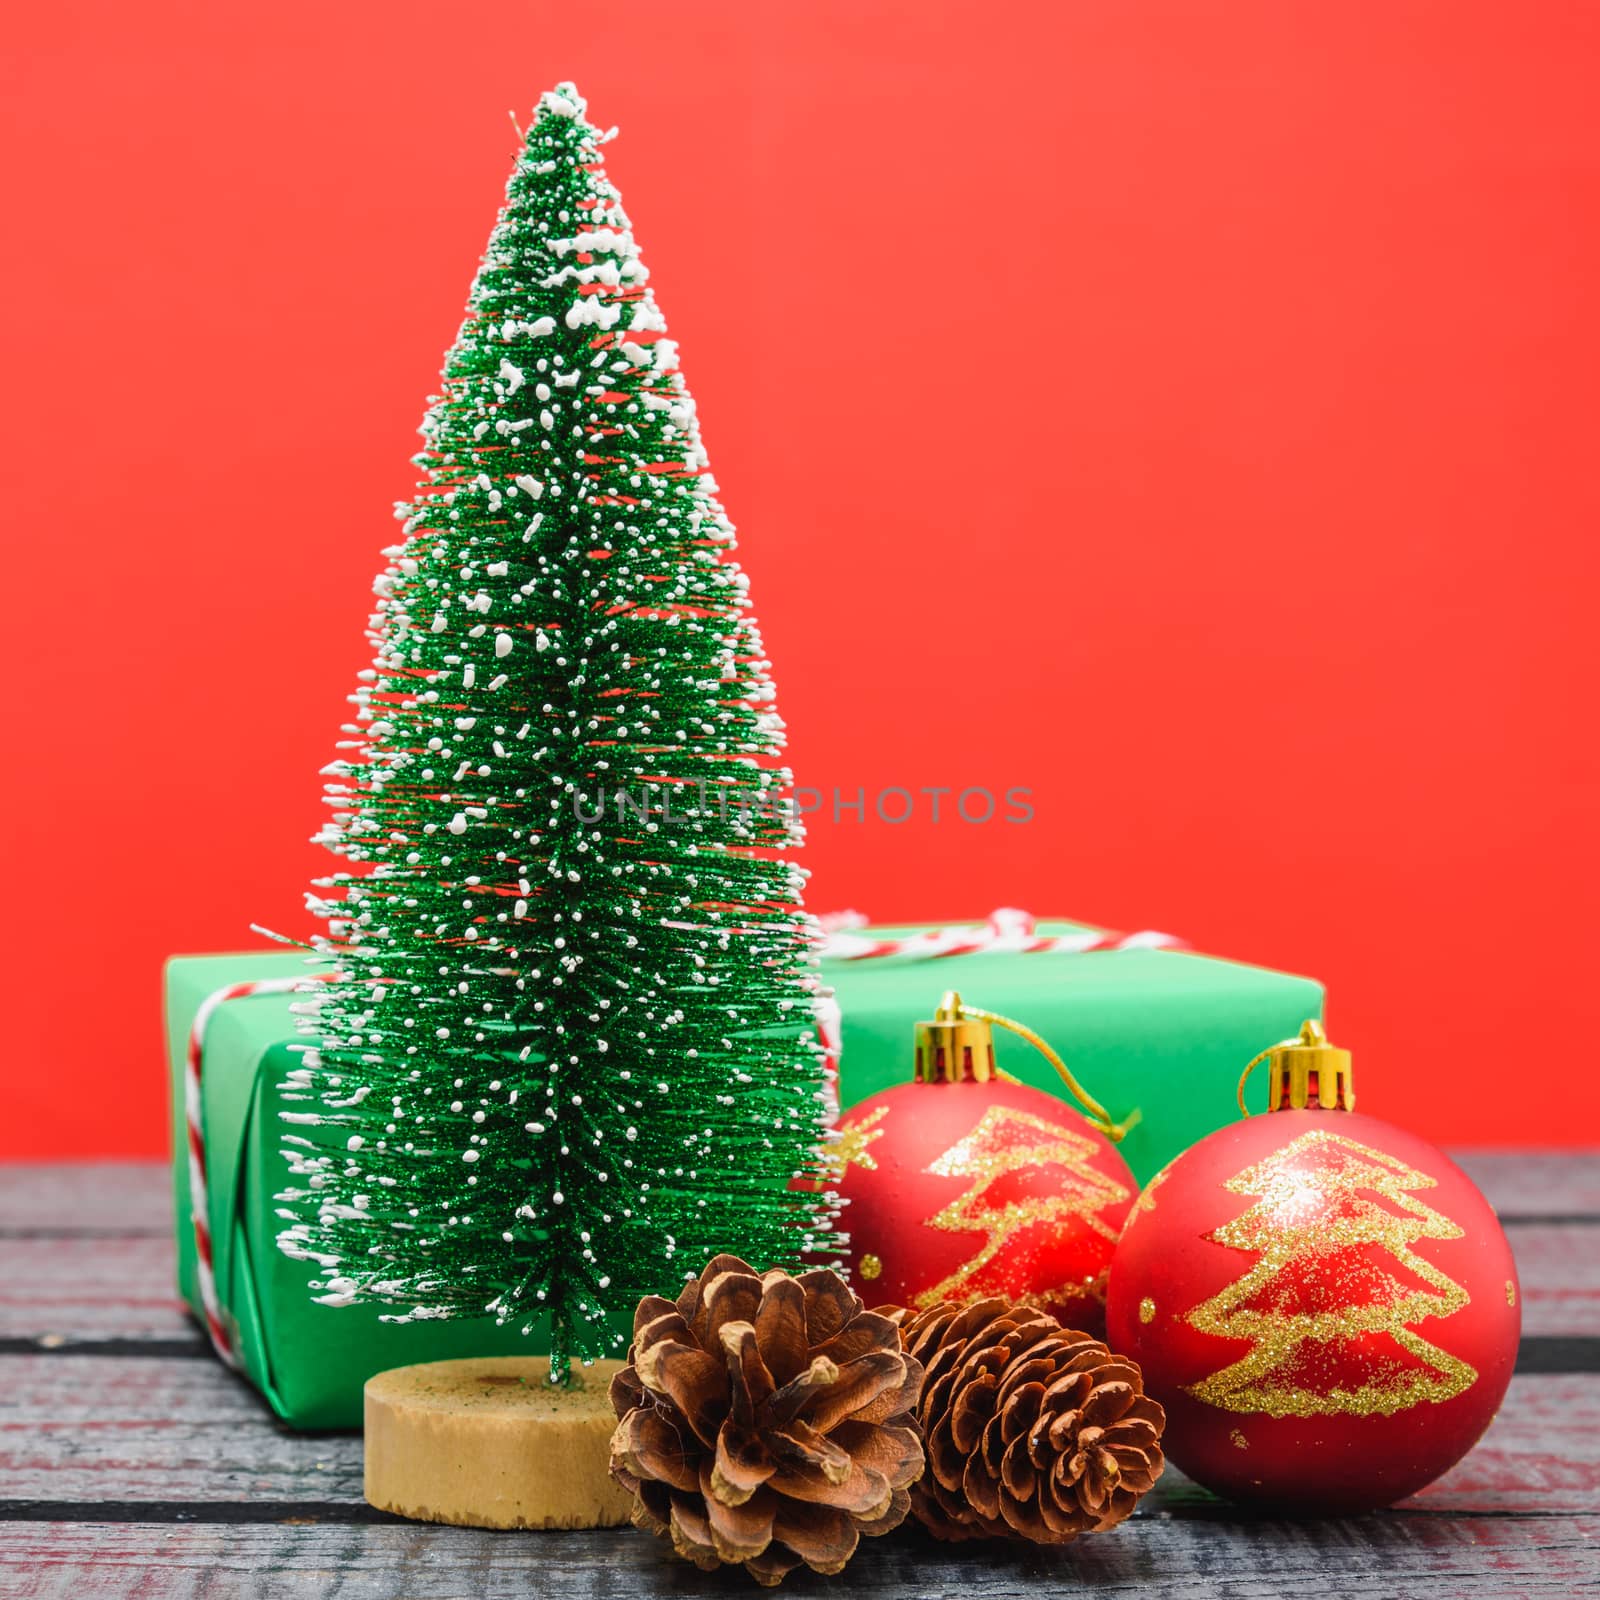 Christmas composition and decorations, minimal green fir tree branches with snow on red background. Merry Christmas concept. Copy space for text